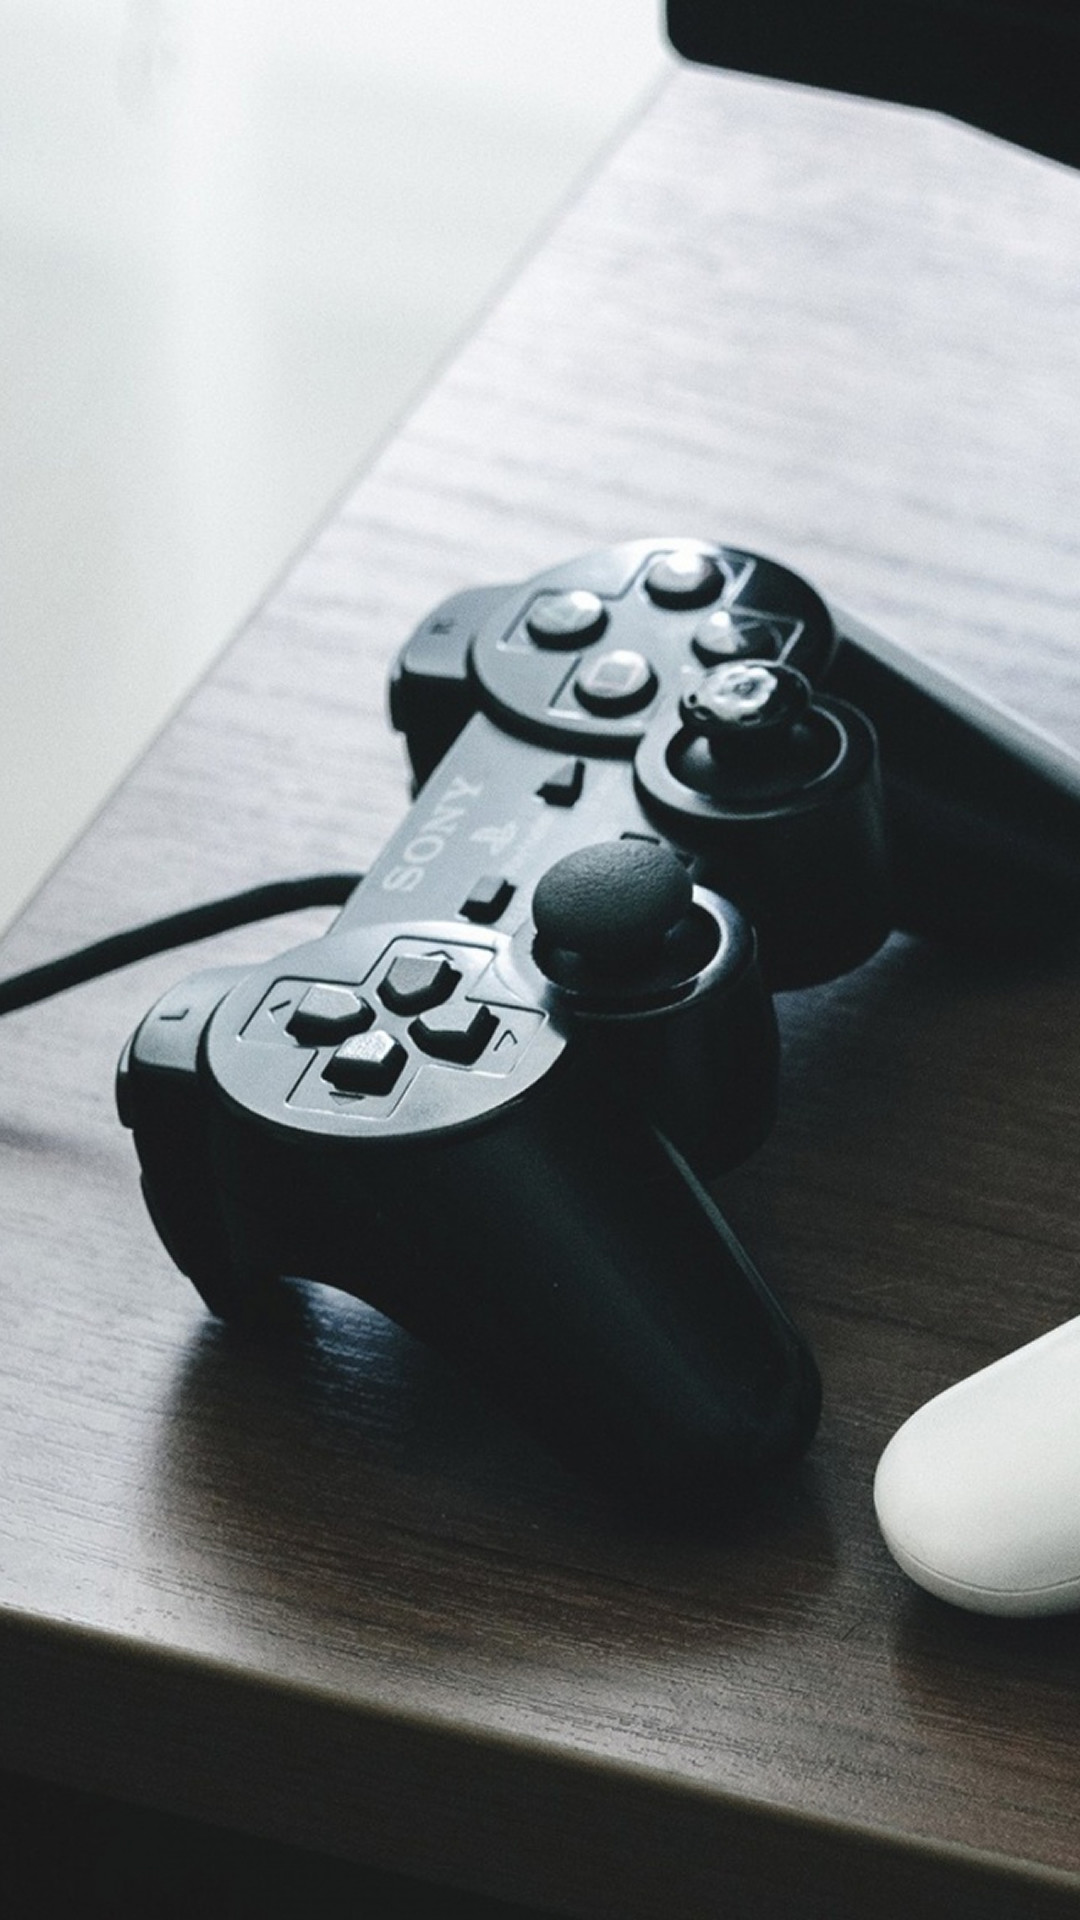 Ps4 Controller Pictures | Download Free Images on Unsplash